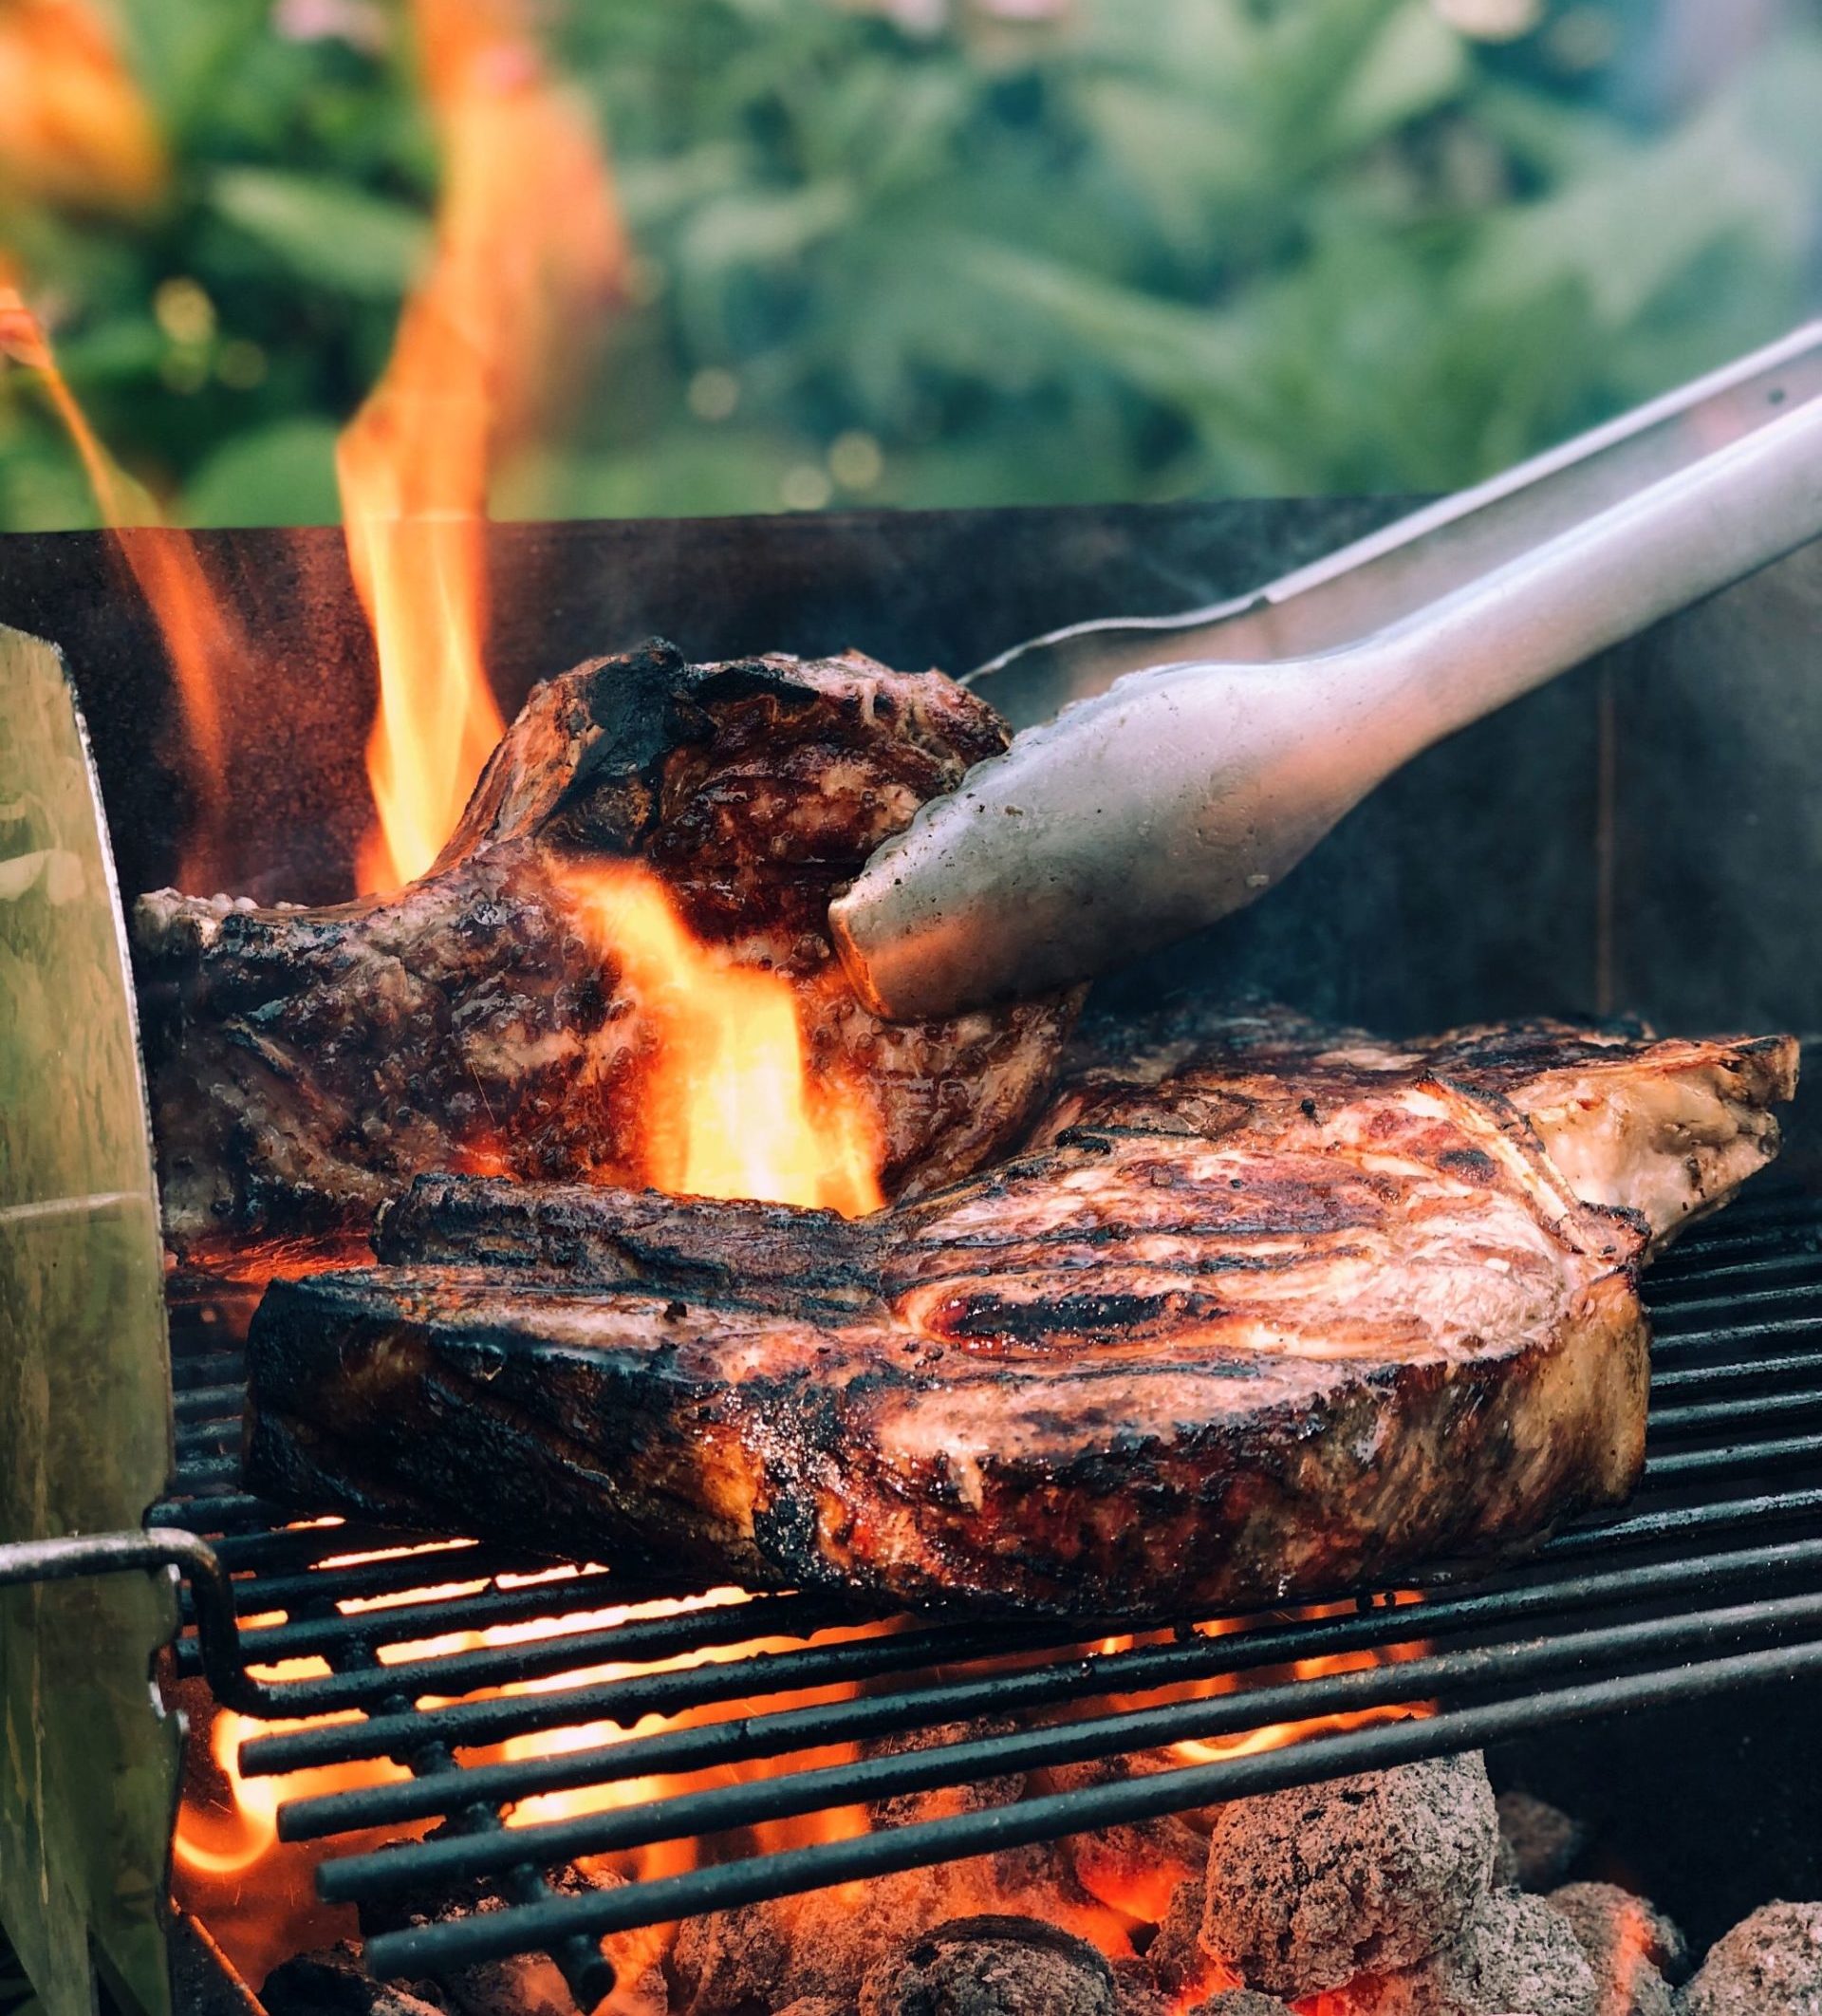 The Grilling Mistakes You Should Avoid